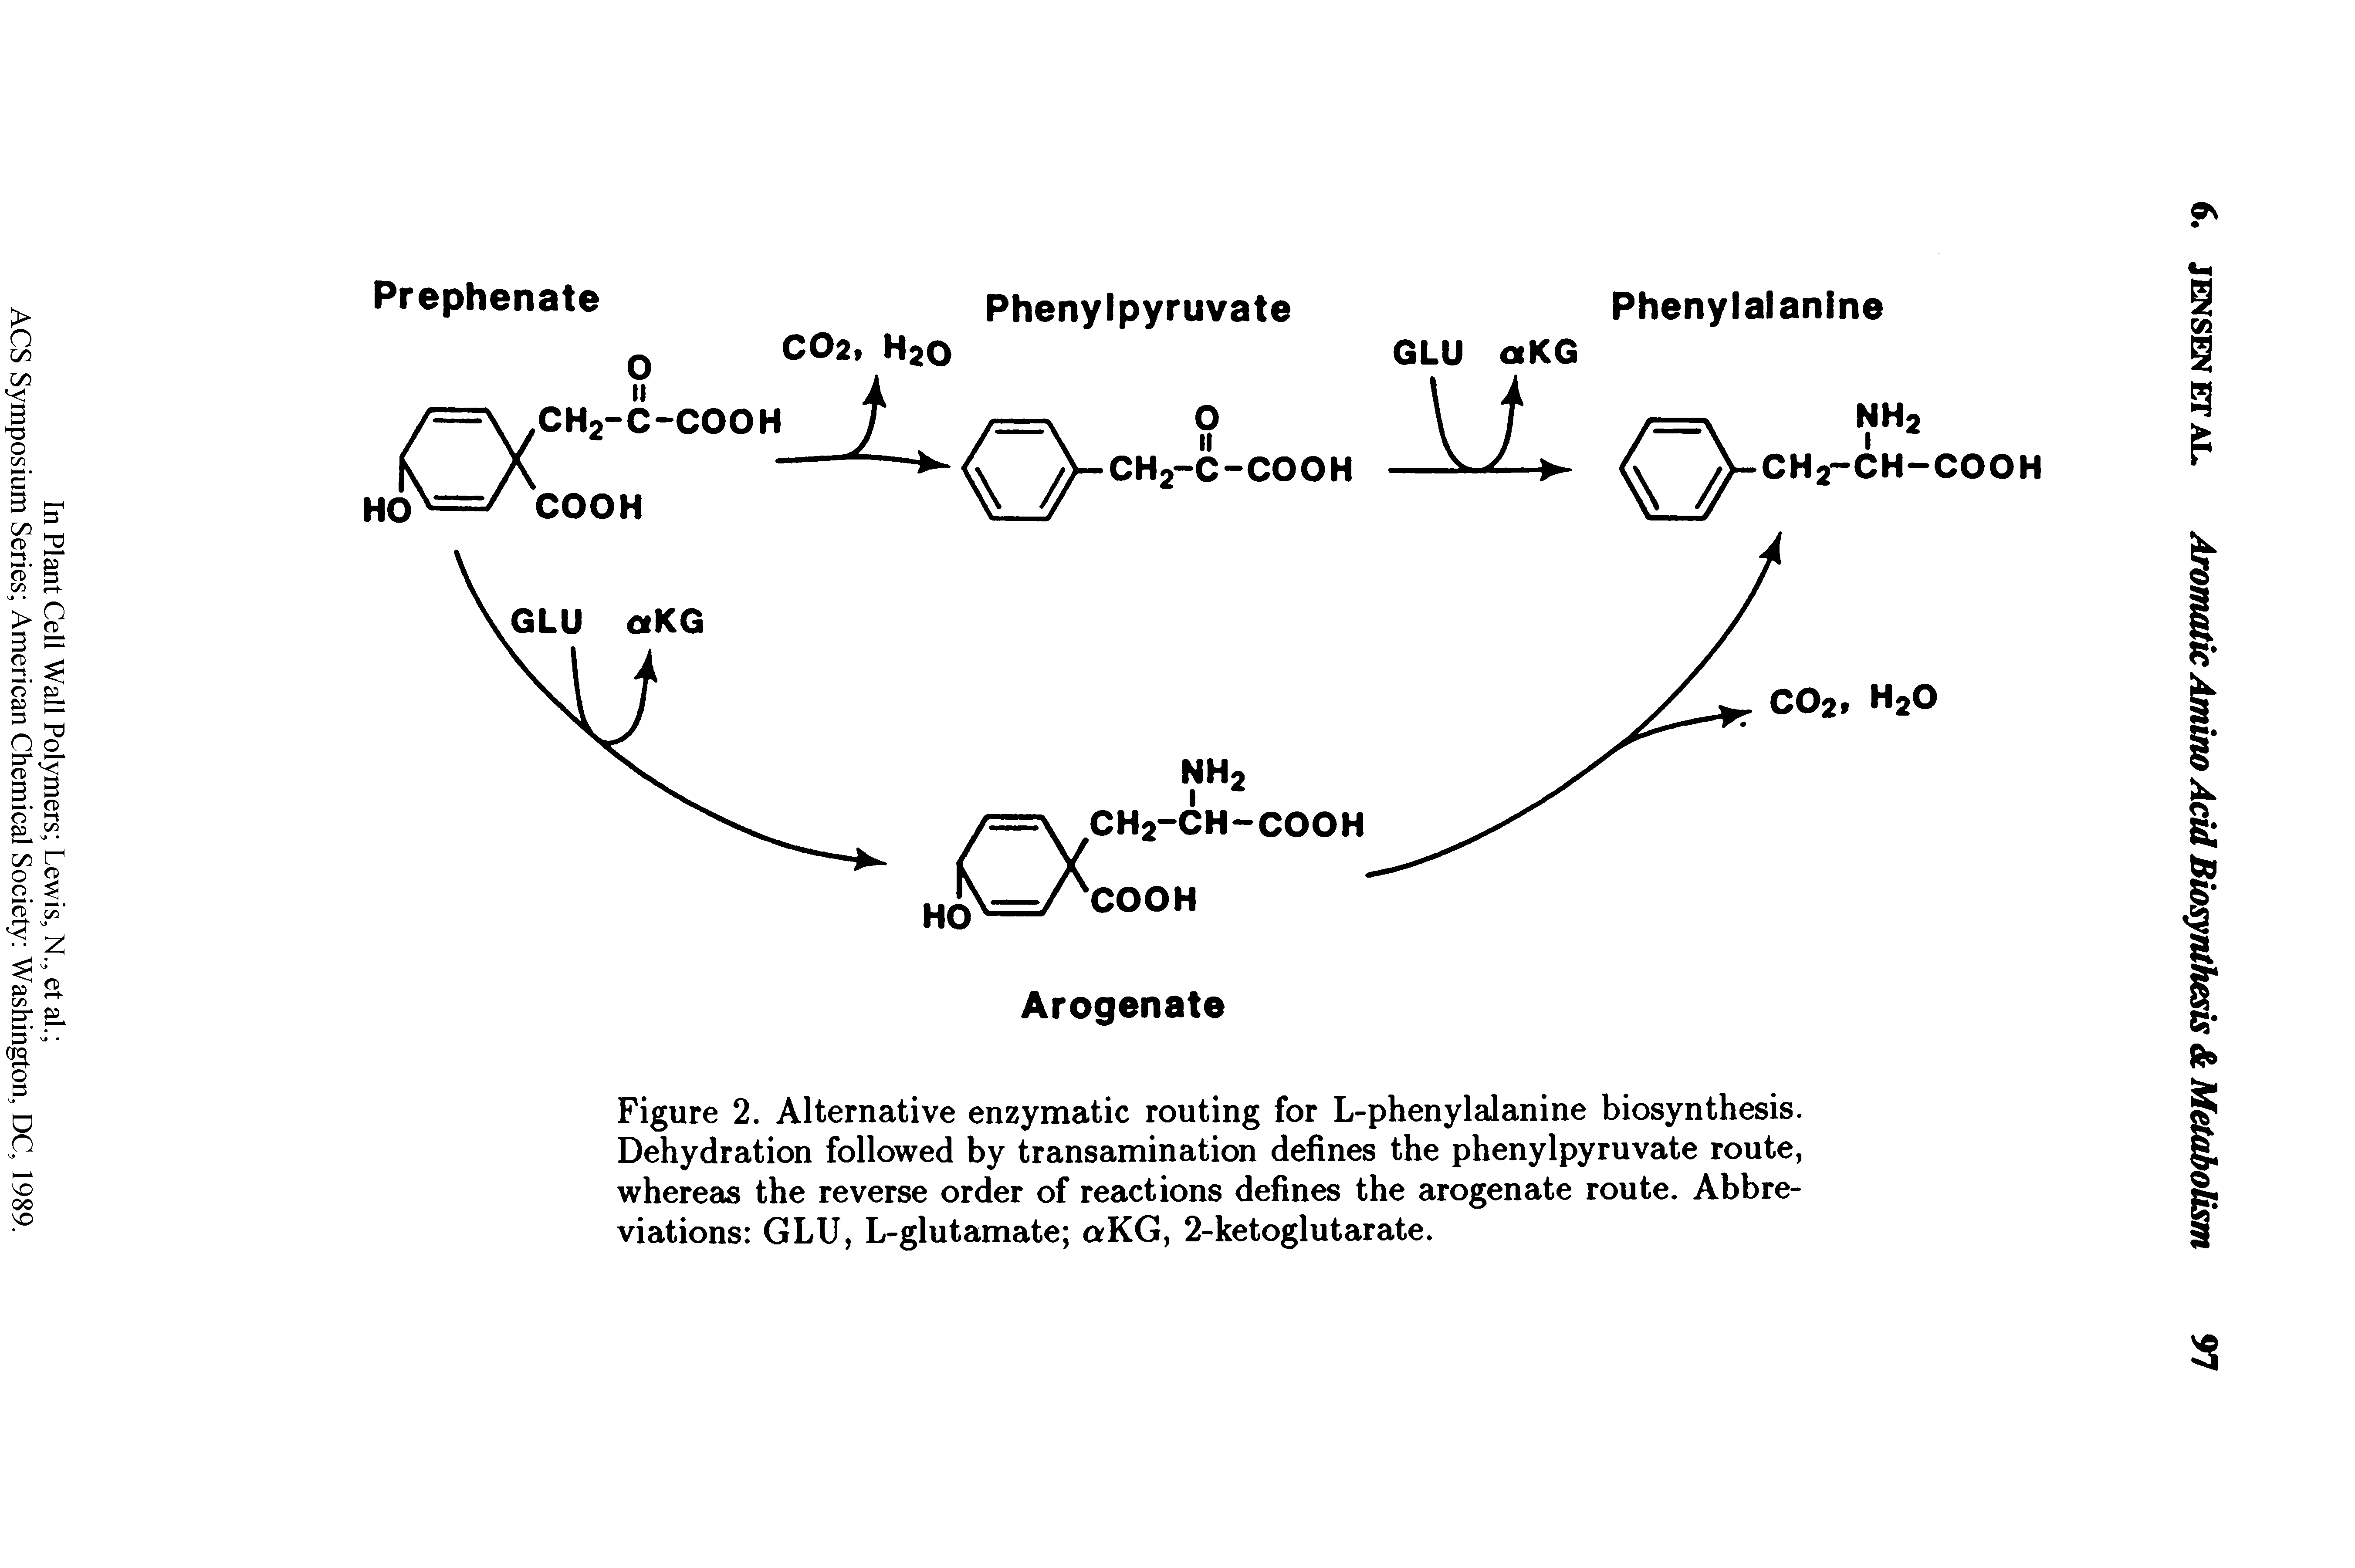 Figure 2. Alternative enzymatic routing for L-phenylalanine biosynthesis. Dehydration followed by transamination defines the phenylpyruvate route, whereas the reverse order of reactions defines the arogenate route. Abbreviations GLU, L-glutamate aKG, 2-ketoglutarate.